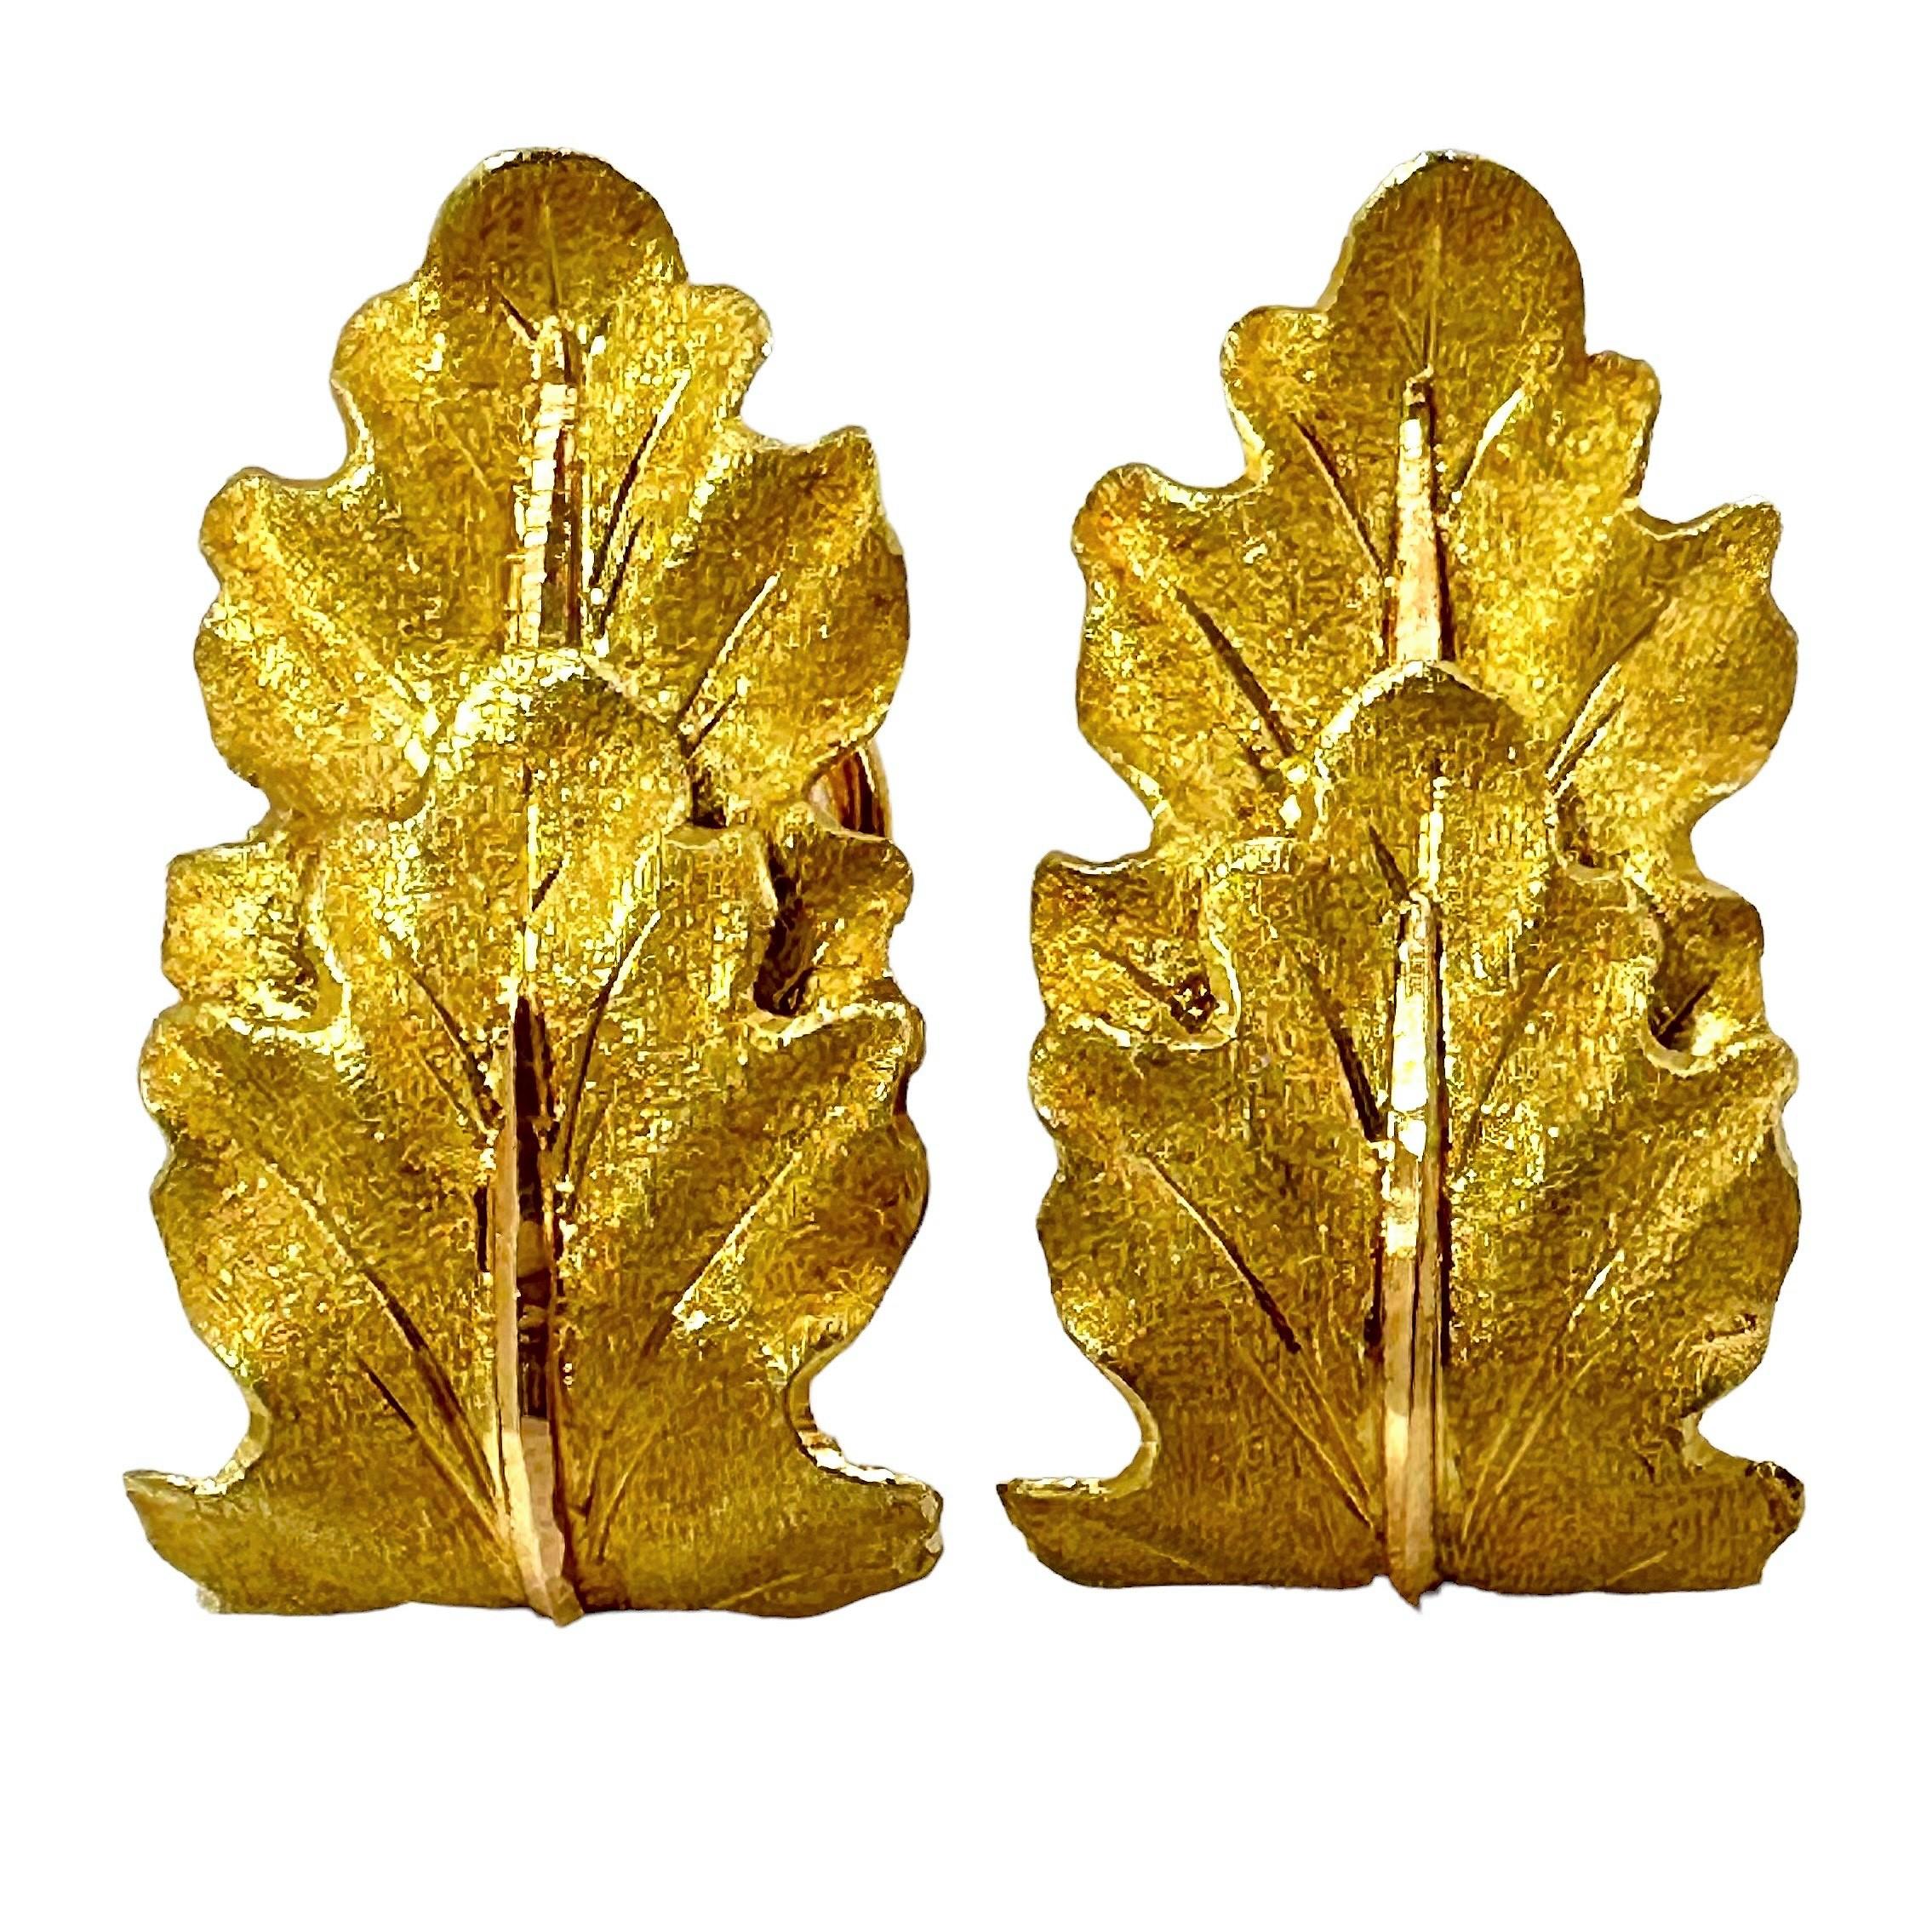 This richly textured  pair of Buccellati Leaf design earrings are a wonderful example of the intricate gold work that the venerated house is known and respected for. They are in excess of 1 inch in length by 1/2 inch in width. These clip on earring